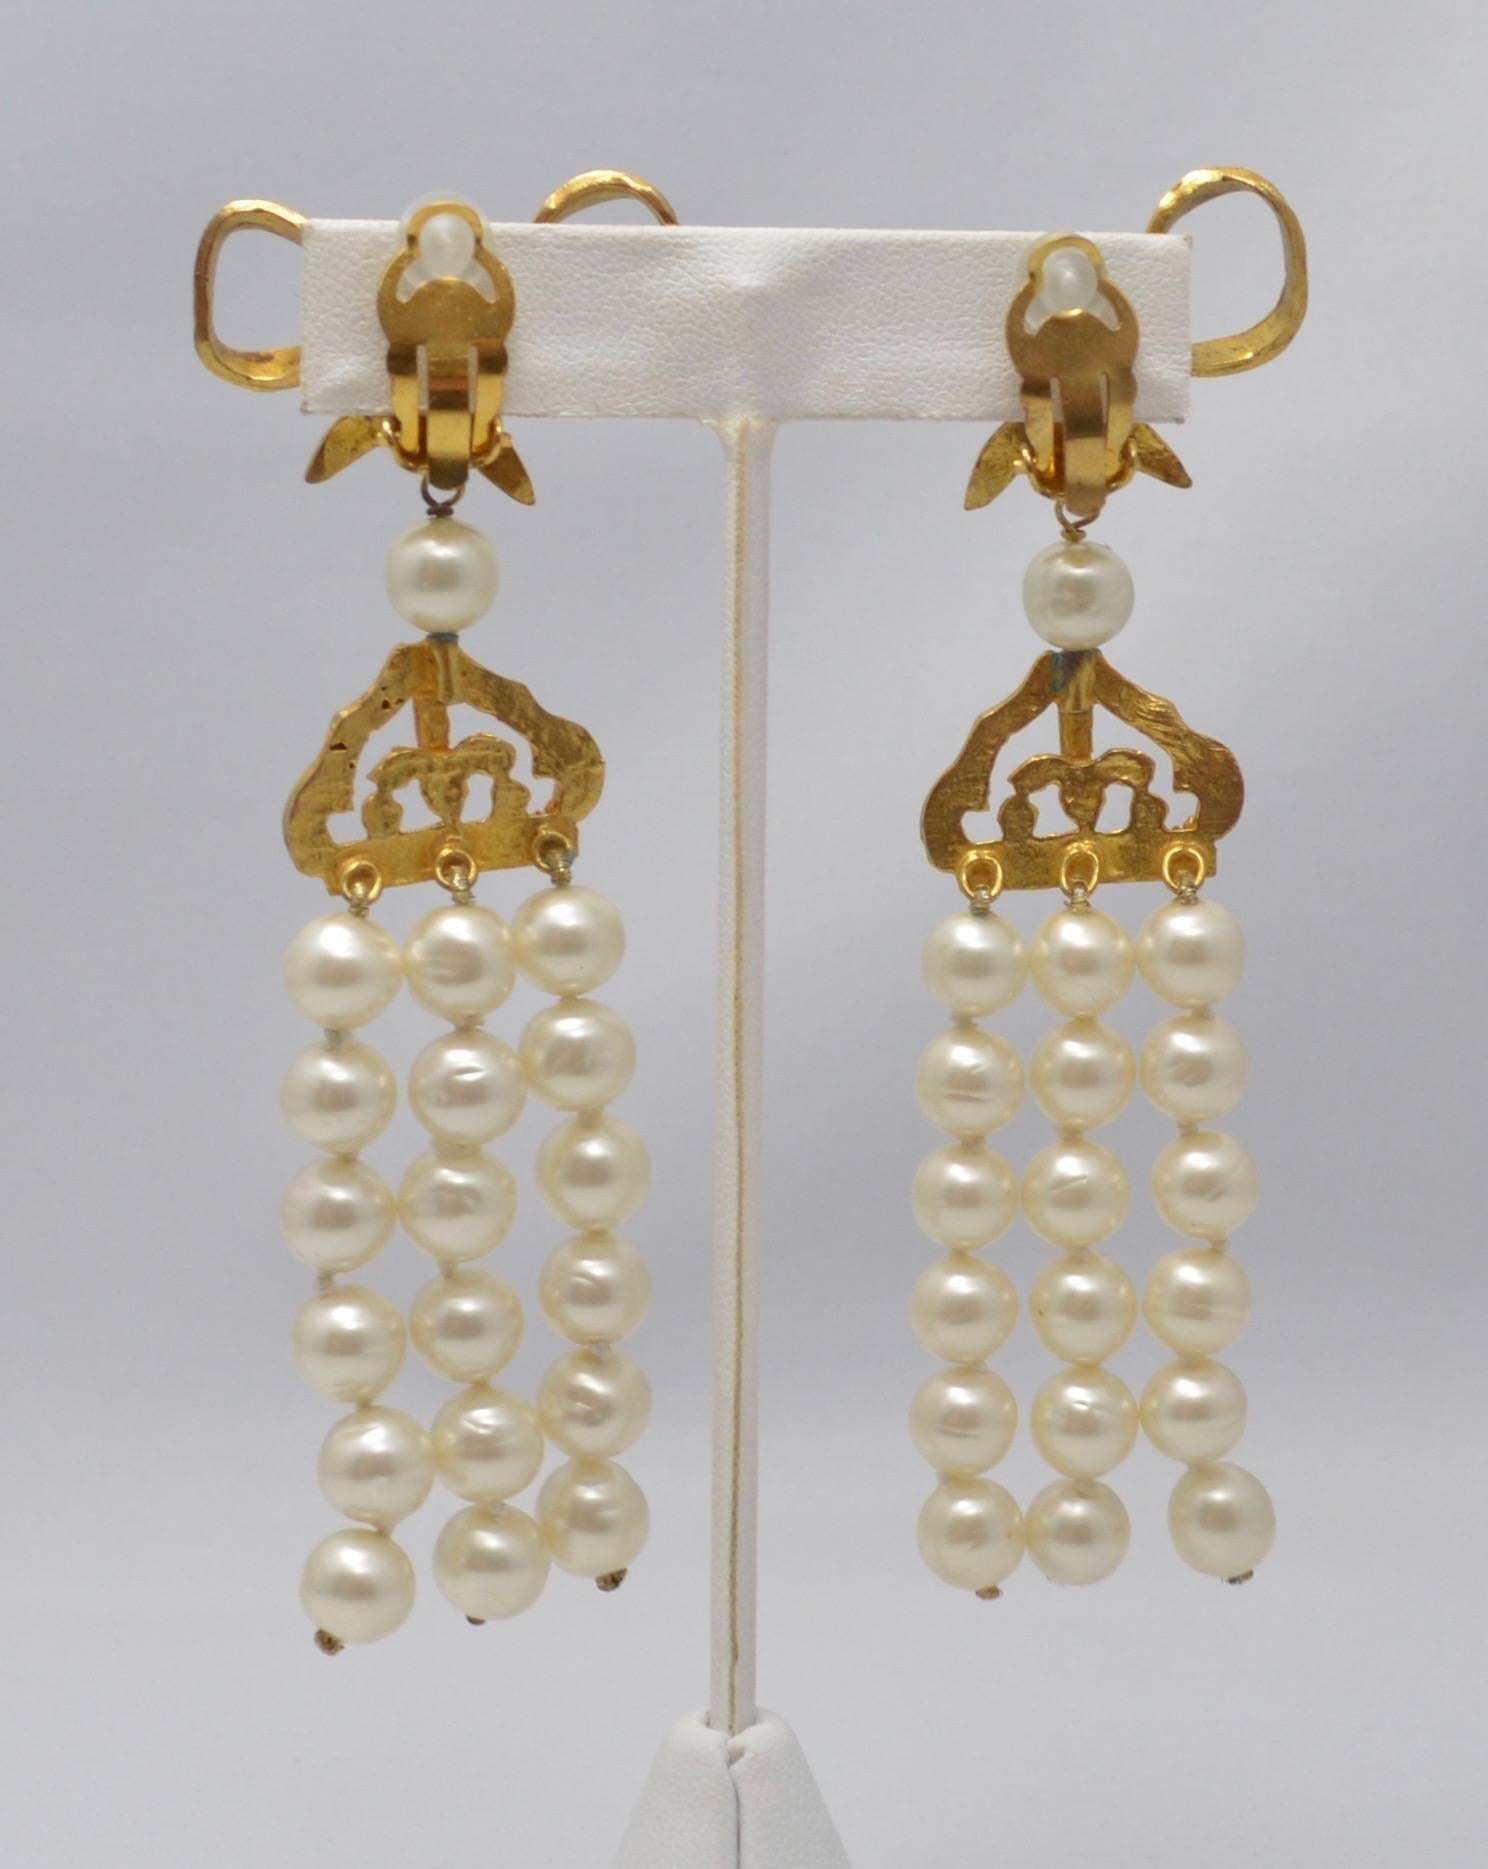 Chanel three strand faux pearl drop/chandelier clip earrings with low top. Chanel signature plate on the back of each earring behind the clip is the round plate signifying that these earrings are from the 1970's or very early 1980's. Excellent